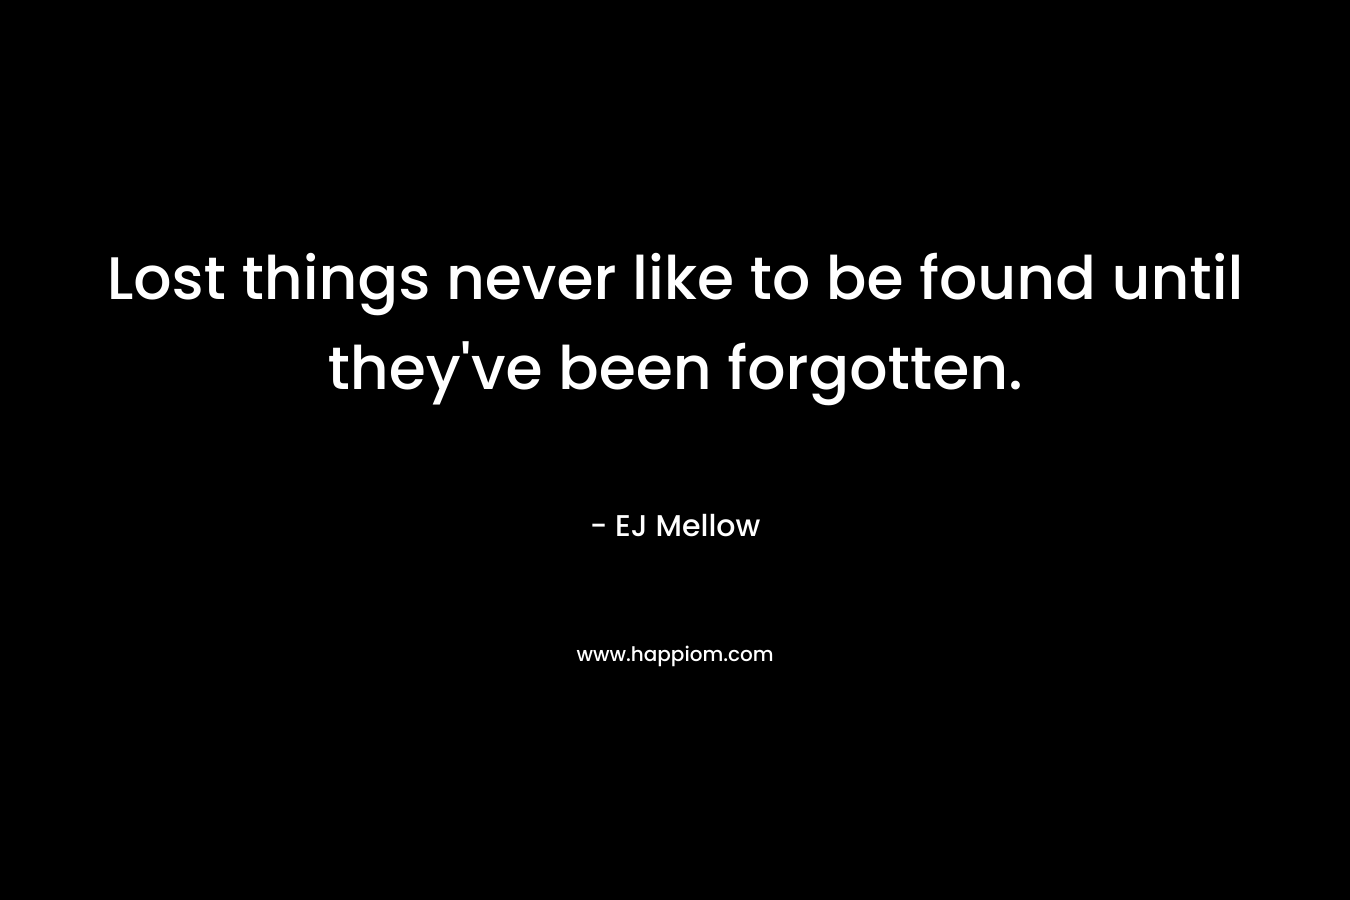 Lost things never like to be found until they’ve been forgotten. – EJ Mellow